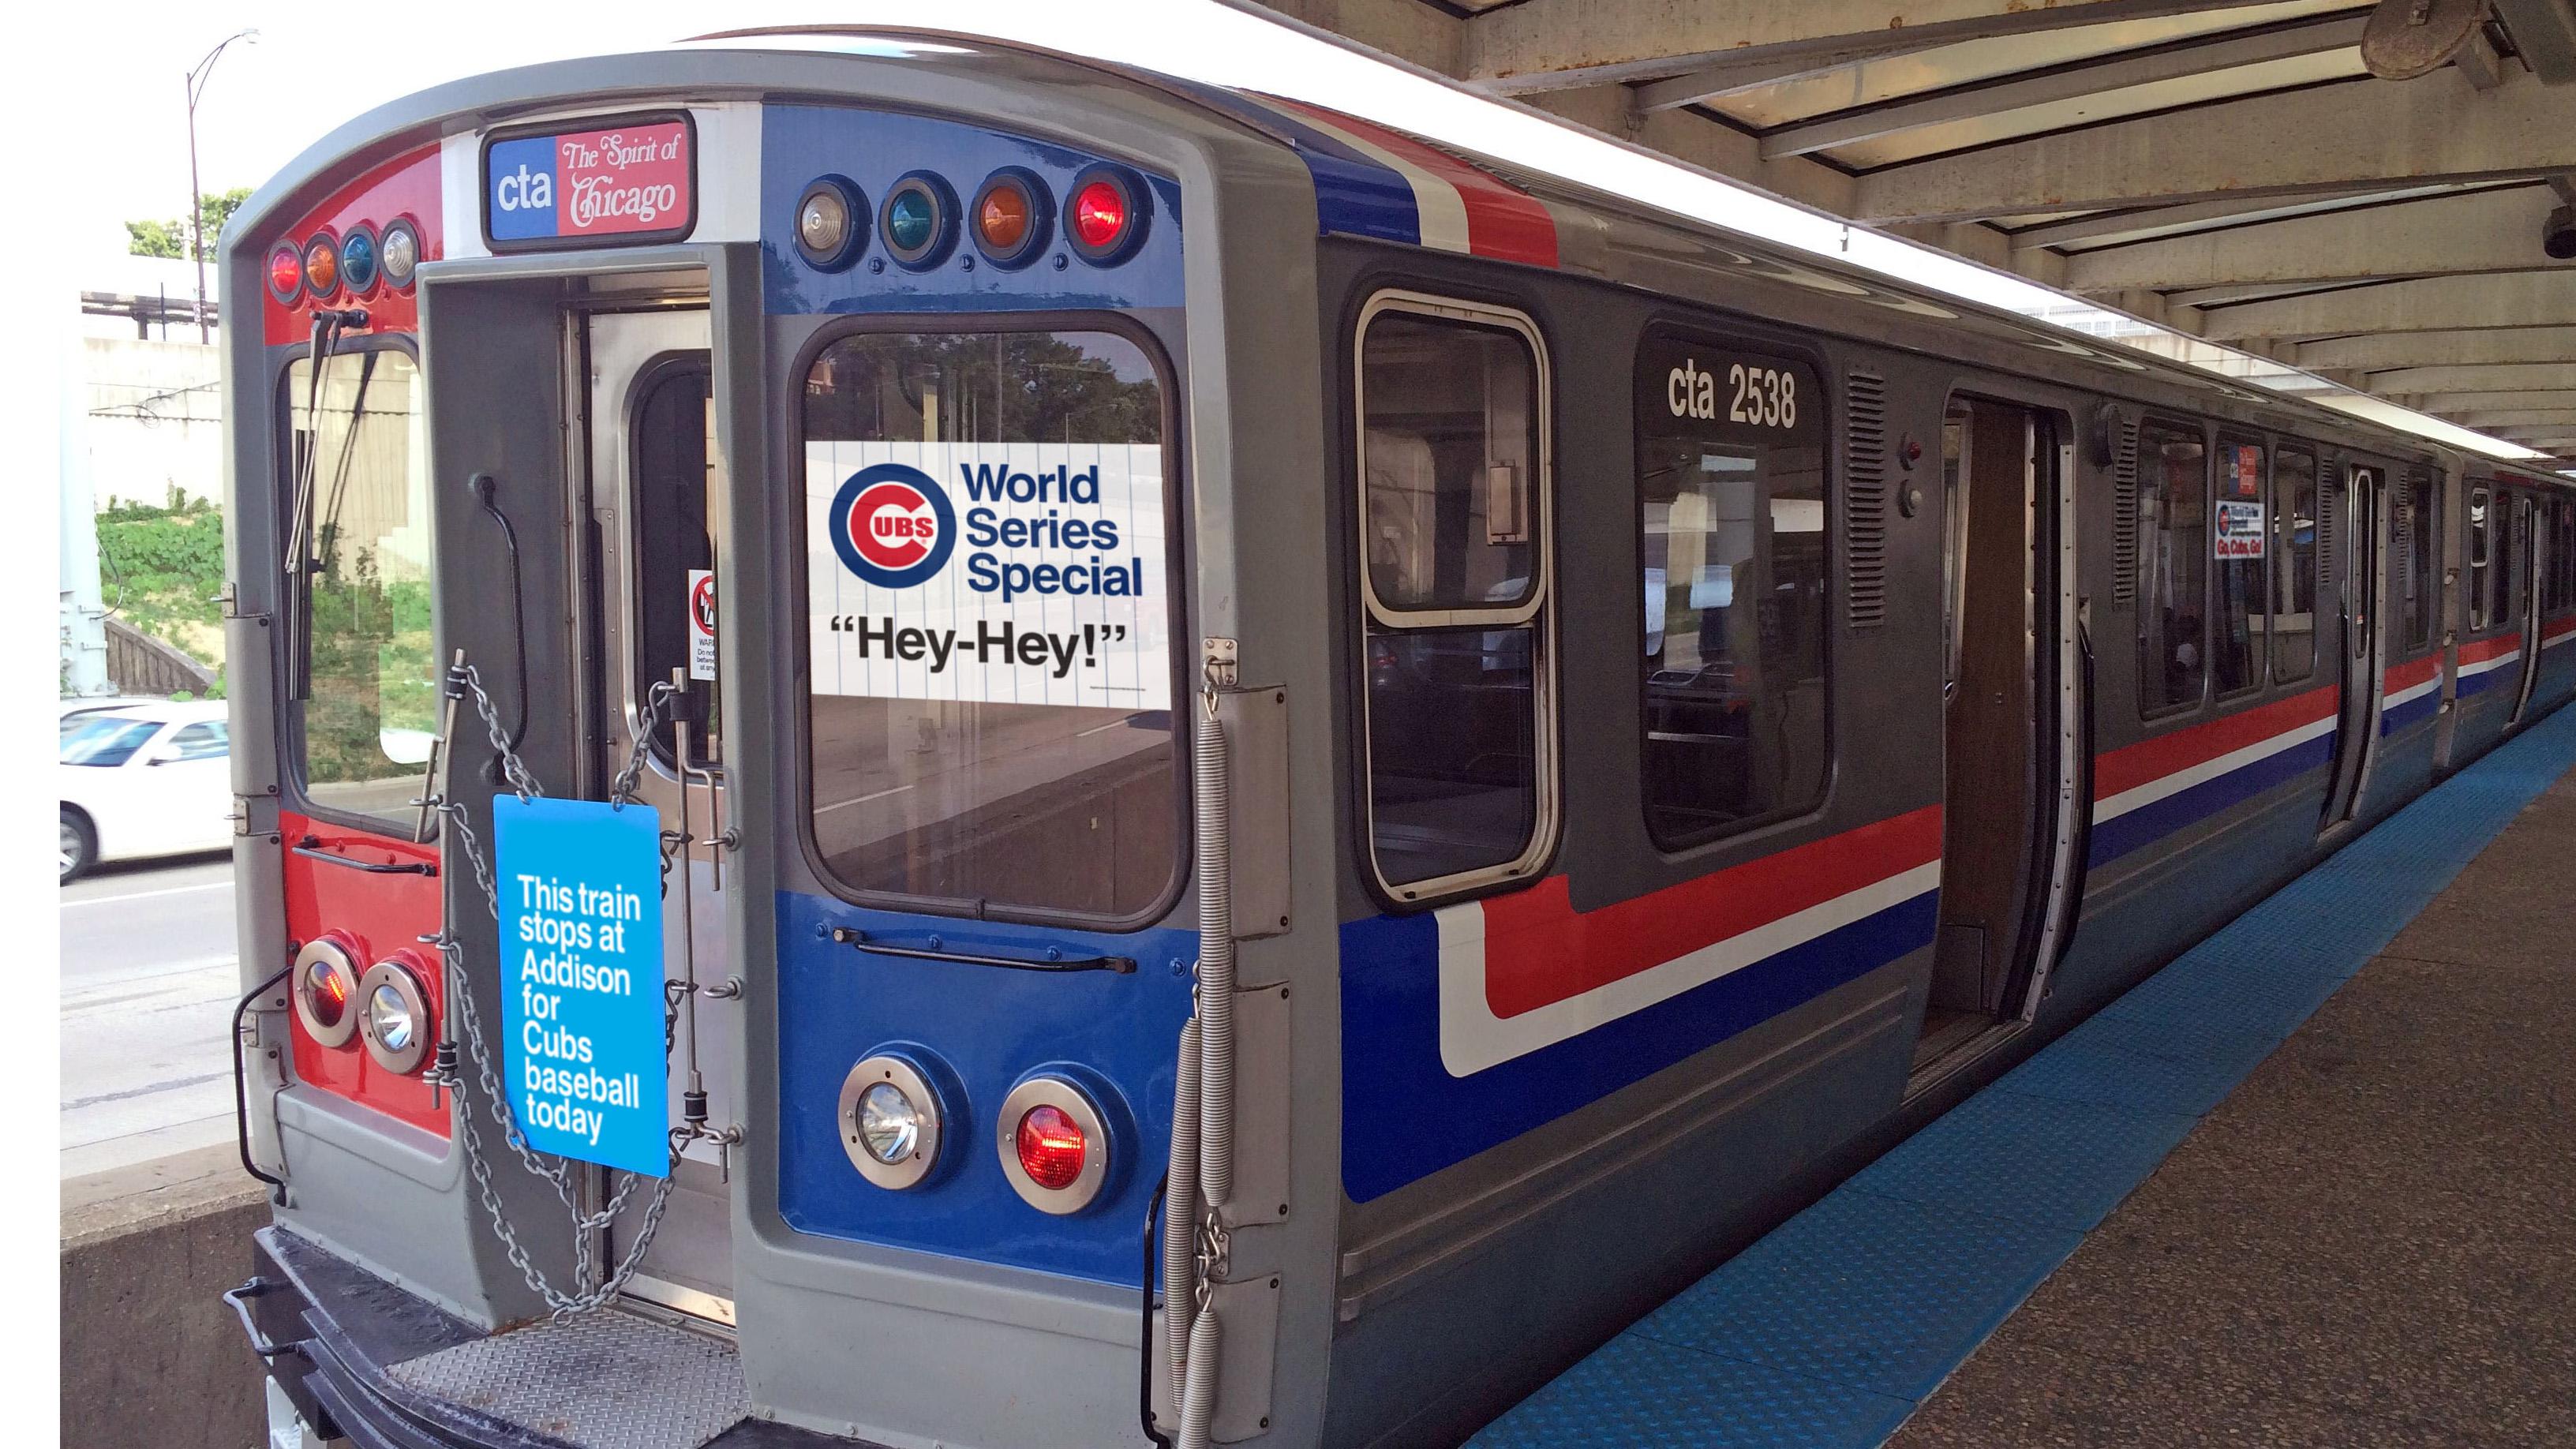 As part of its Heritage fleet program, the CTA will be operating its refurbished rail cars on the Red Line before the Cubs’ World Series home games this weekend. (Courtesy of Chicago Transit Authority)